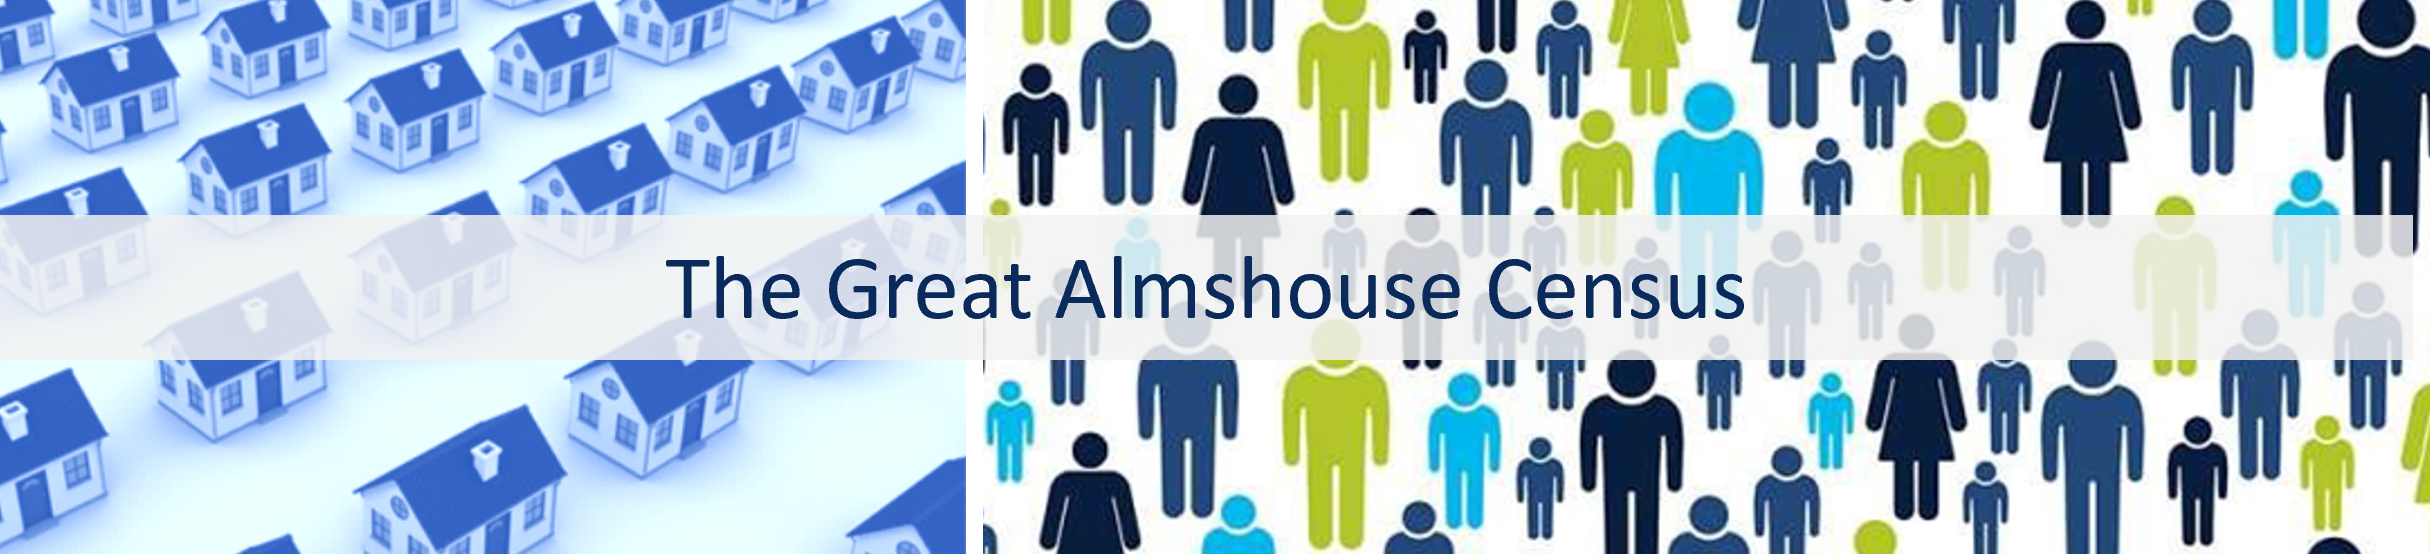 The Great Almshouse Census